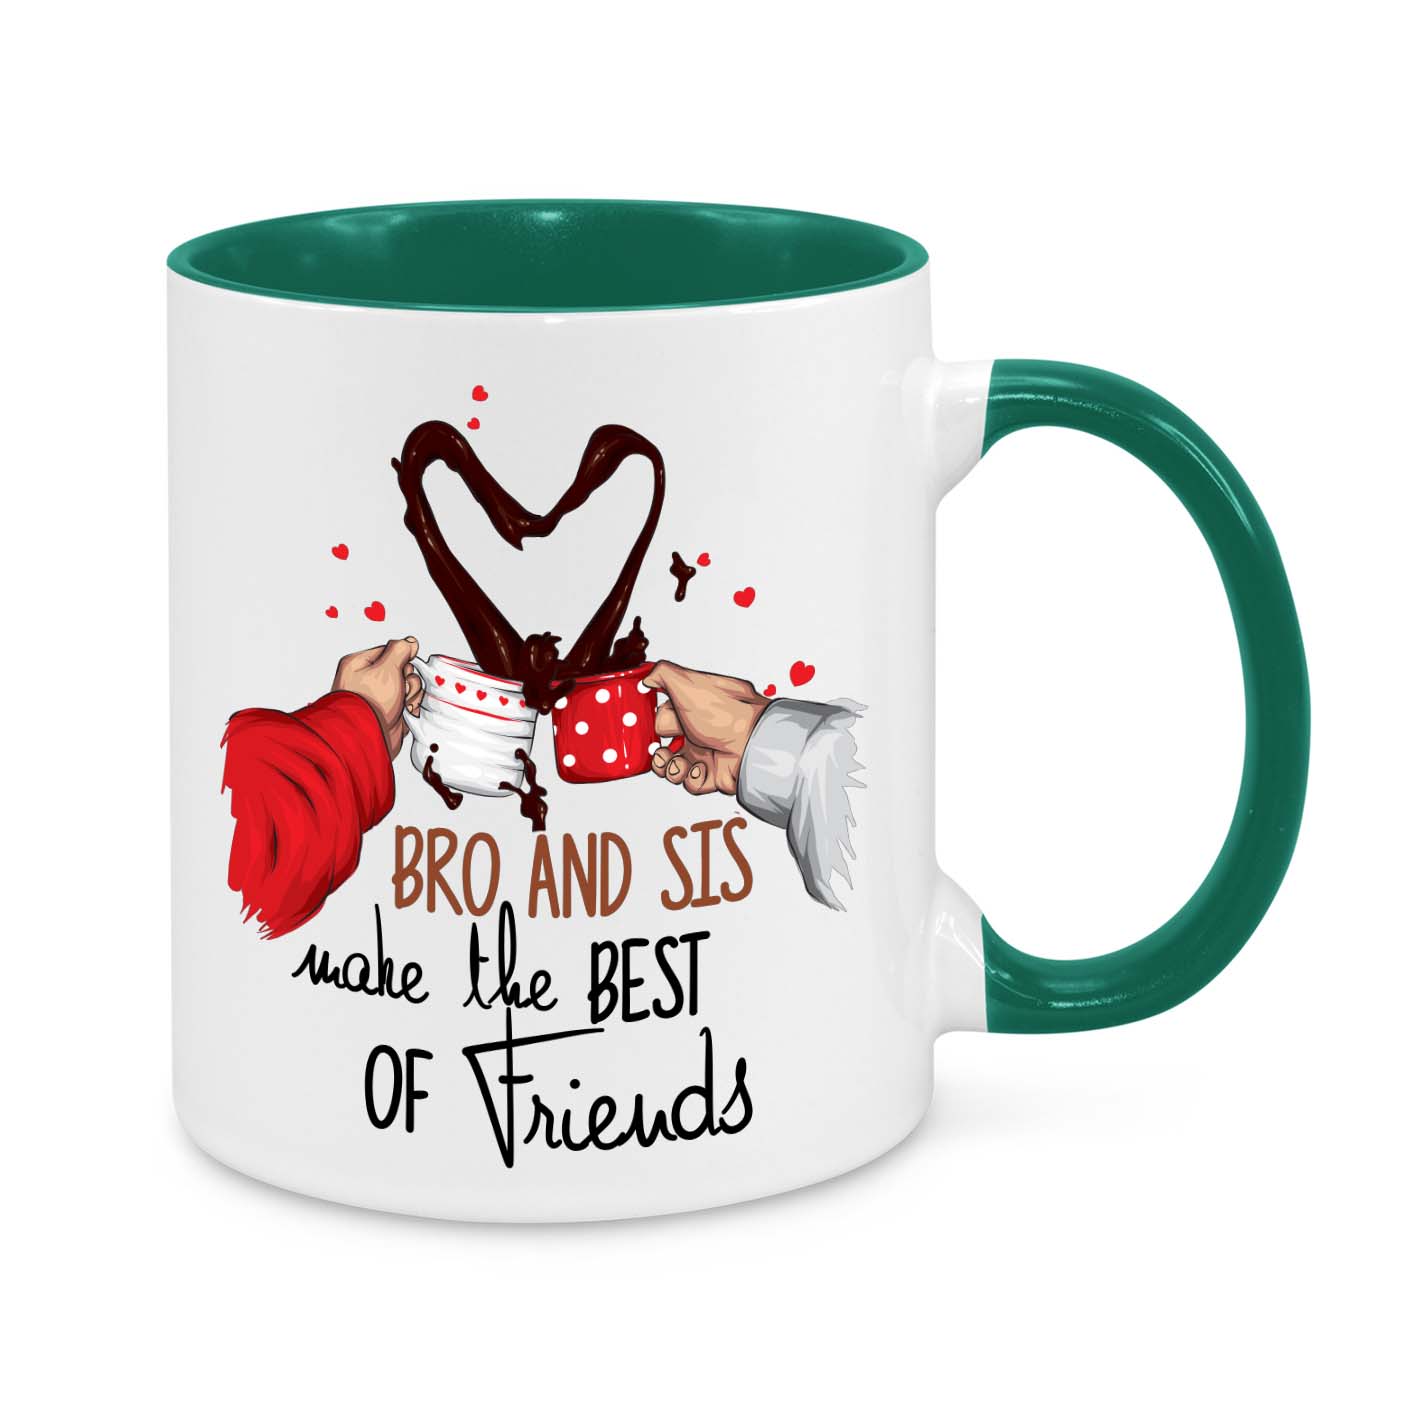 Bro and Sis Make the Best of Friends Novelty Mug